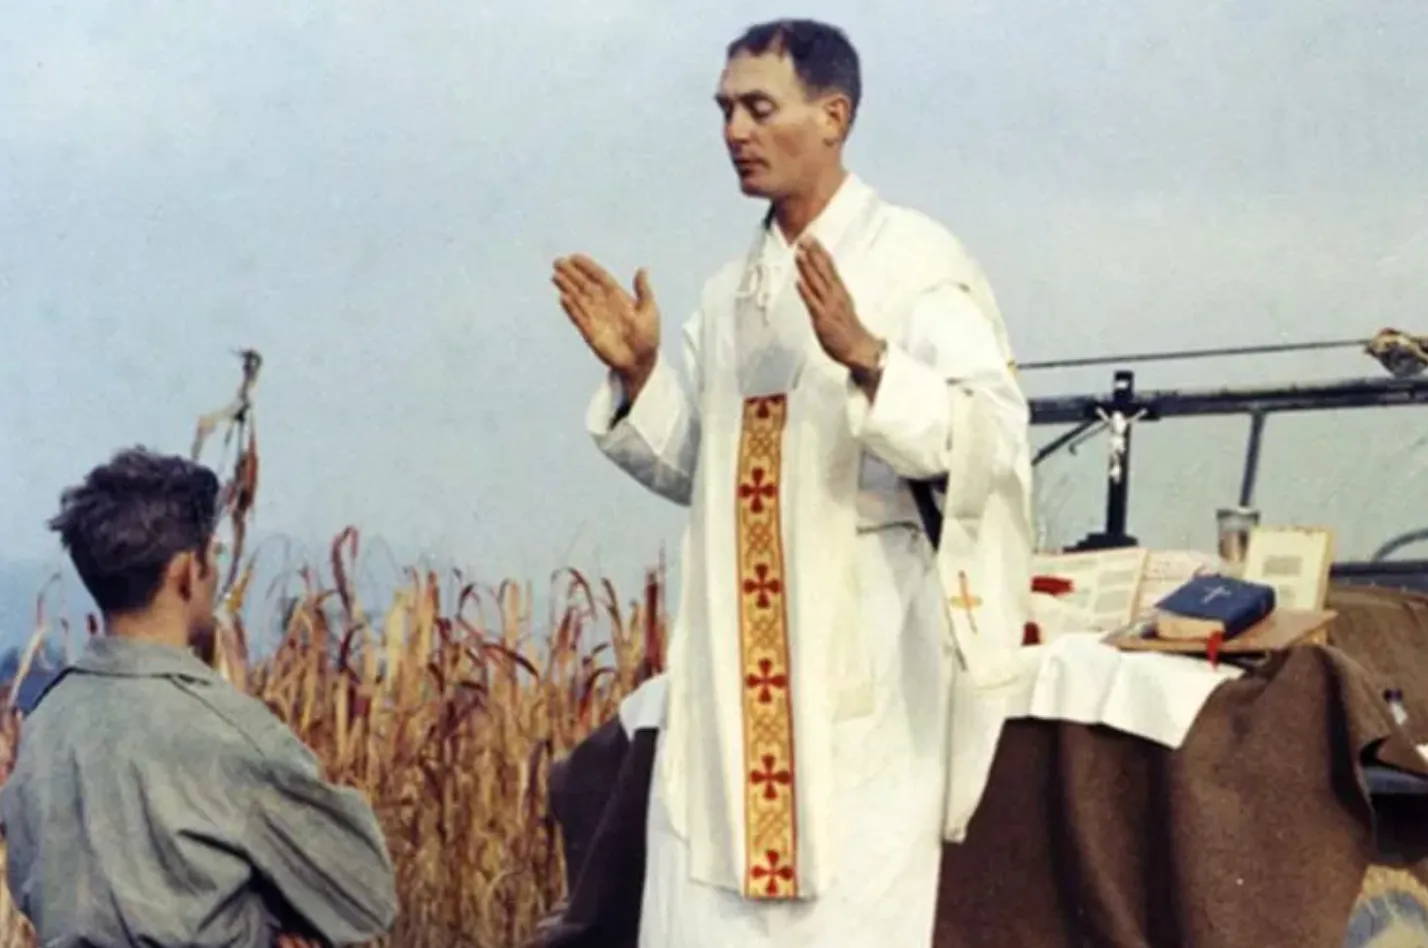 Father Emil Kapaun celebrates Mass using the hood of a Jeep as his altar on Oct. 7, 1950. Public Domain